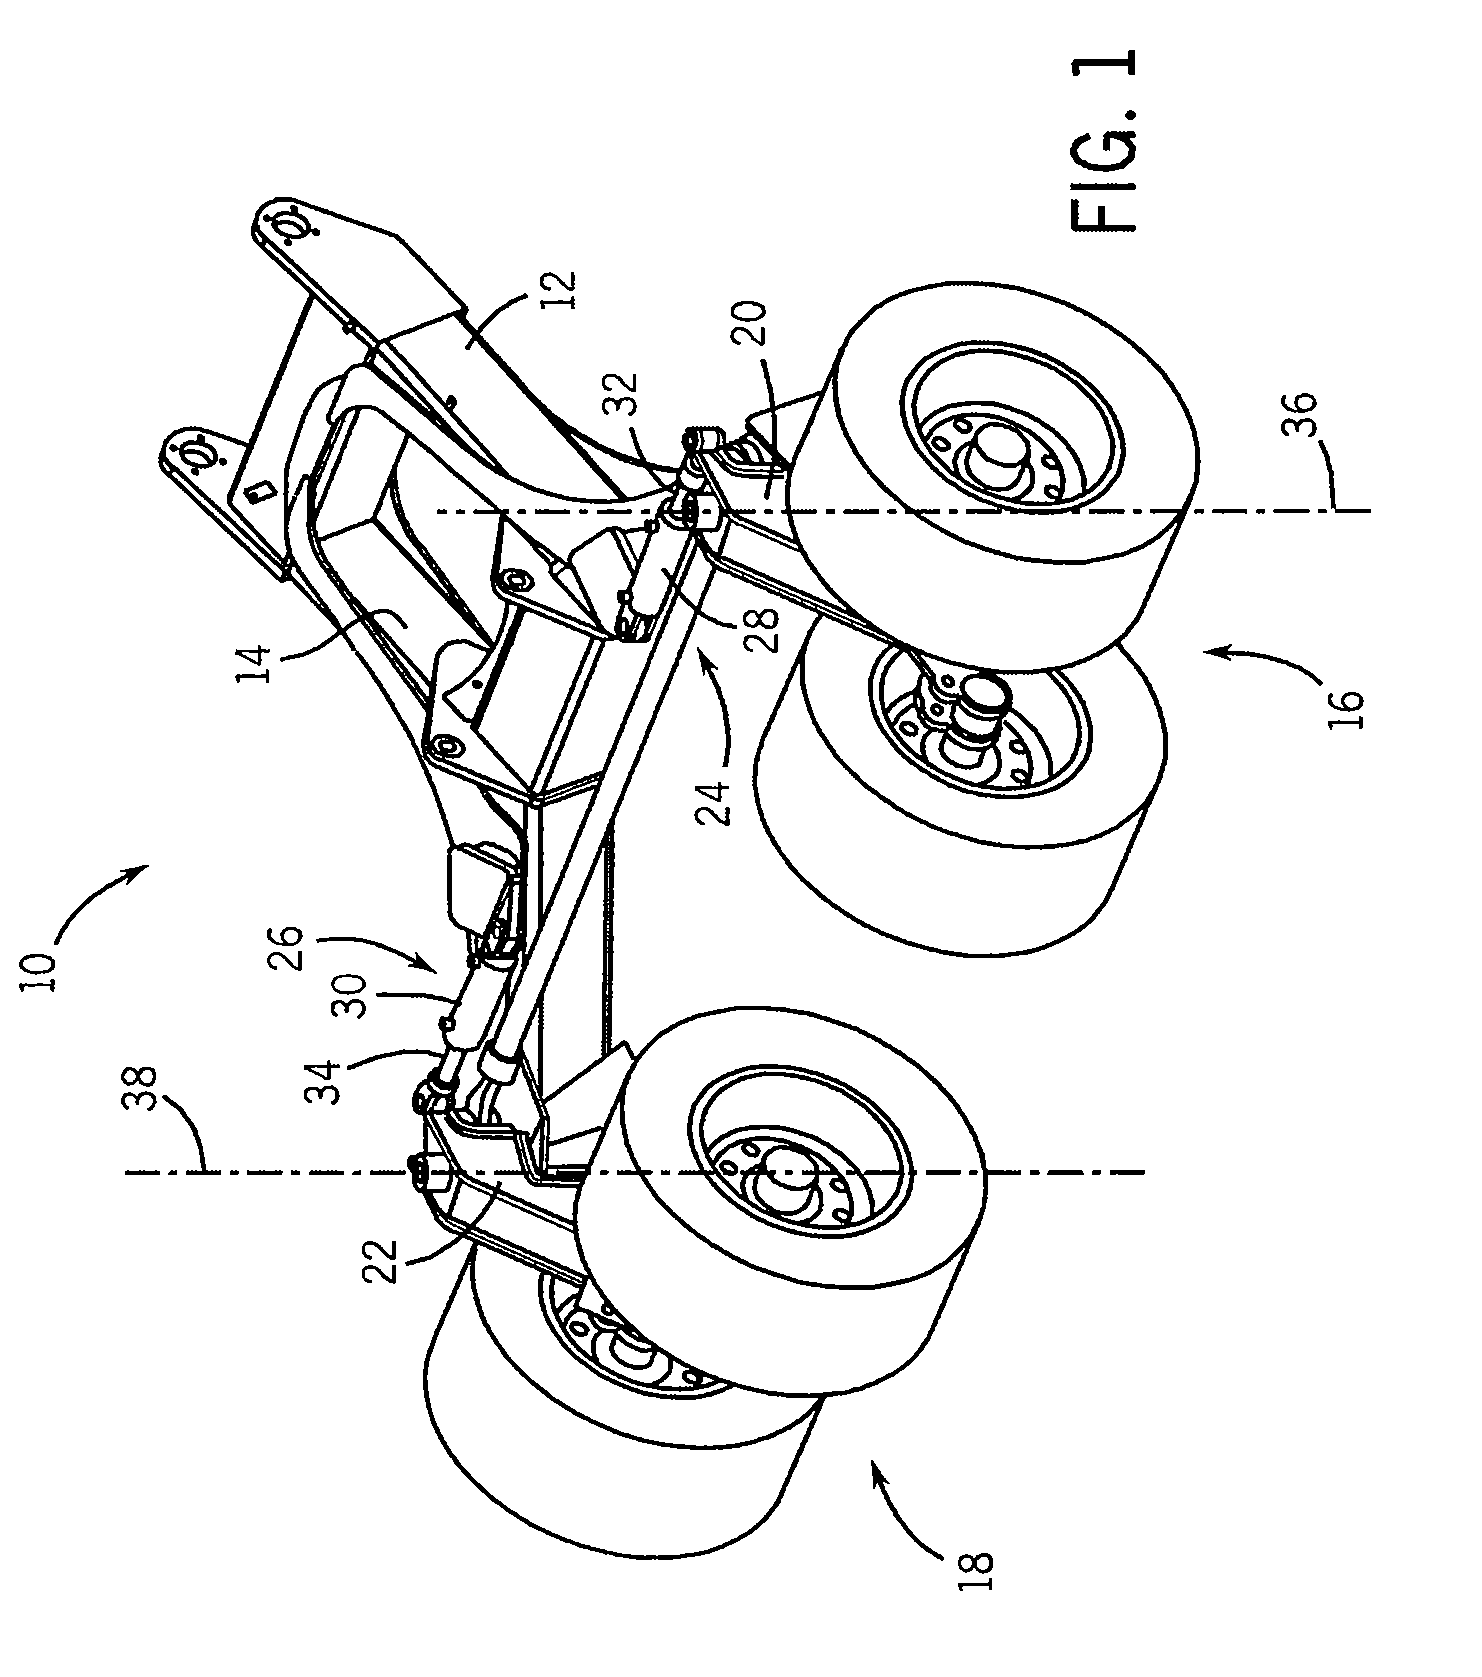 Method for automatic headland turn correction of farm implement steered by implement steering system